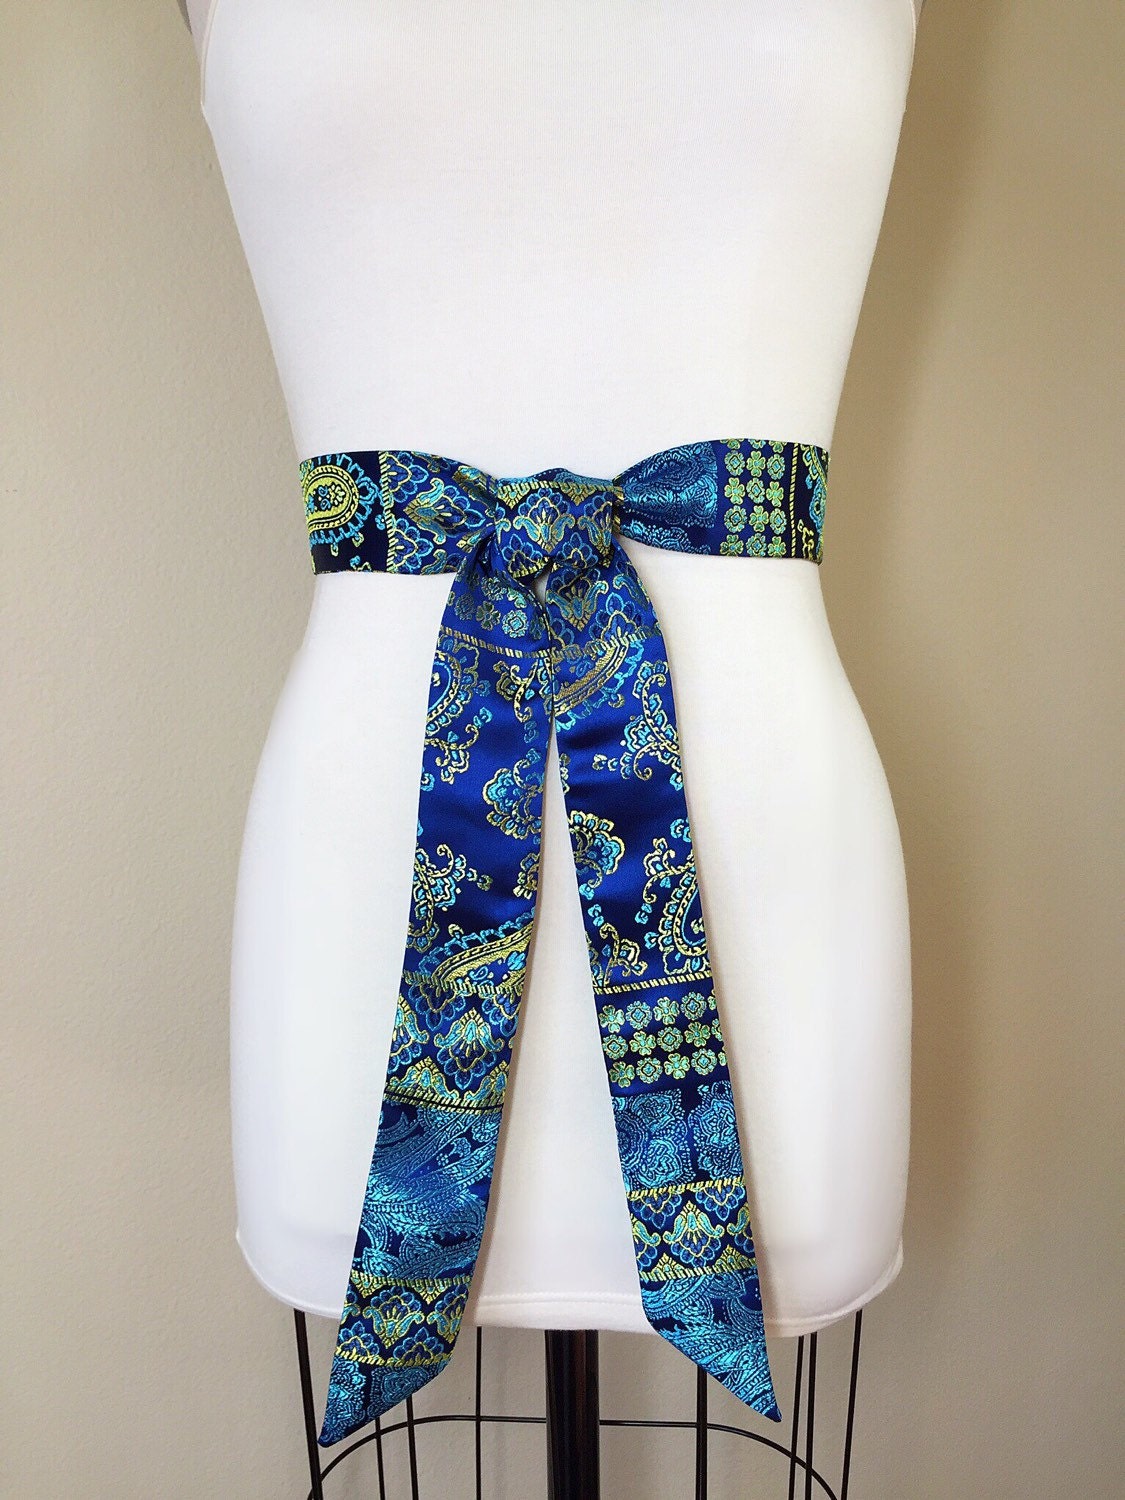 Royal Blue Sash in Asian Brocade, Paisley & Floral Sash in Blue and ...